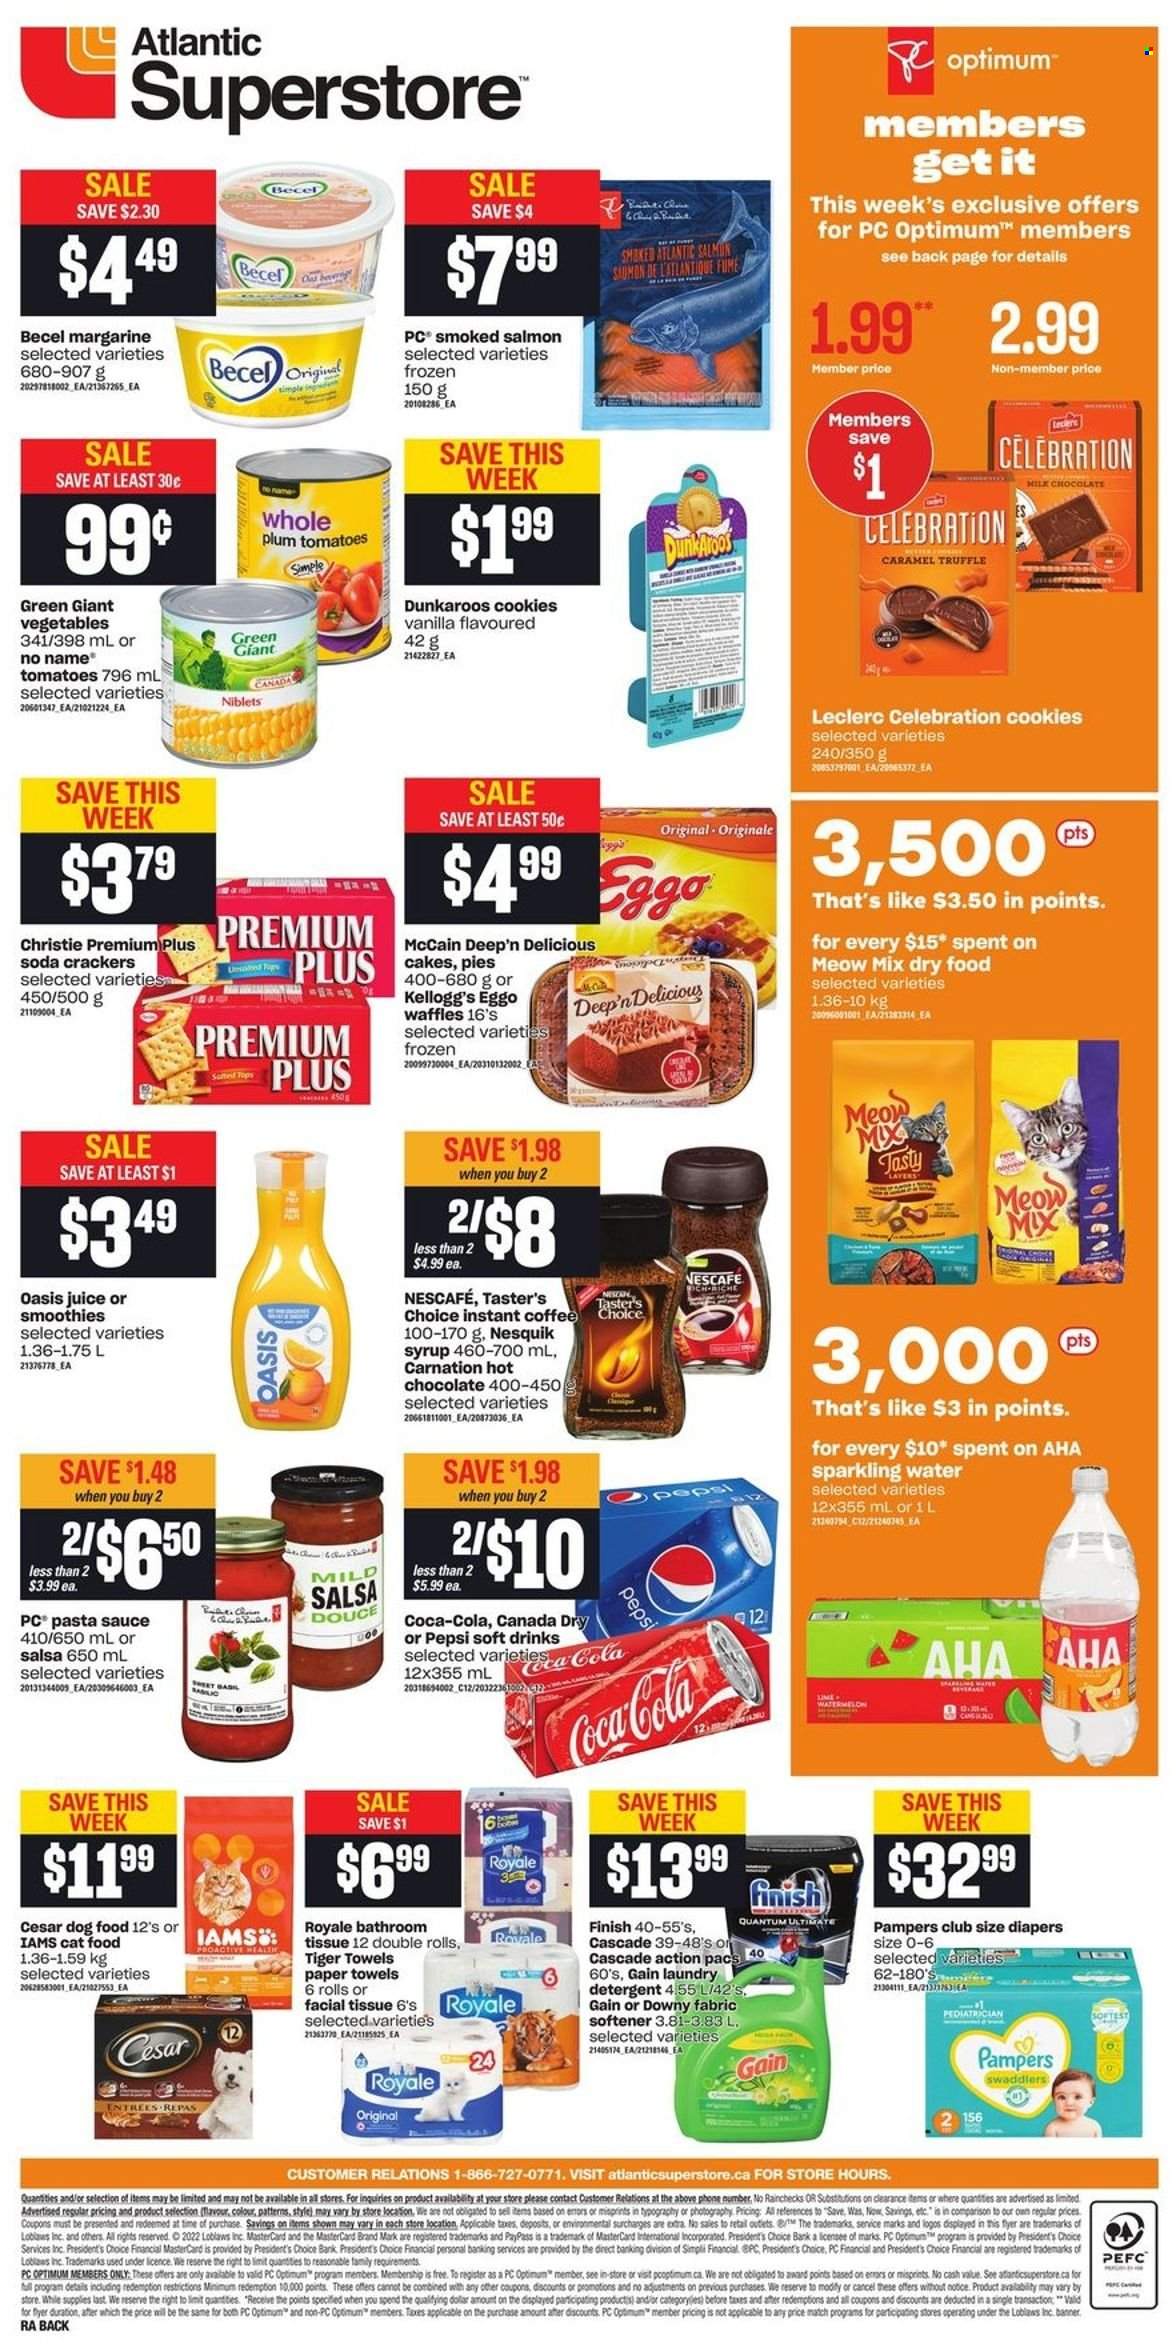 thumbnail - Atlantic Superstore Flyer - January 13, 2022 - January 19, 2022 - Sales products - cake, waffles, tomatoes, smoked salmon, No Name, pasta sauce, sauce, Président, margarine, McCain, cookies, milk chocolate, truffles, crackers, Kellogg's, salsa, syrup, Canada Dry, Coca-Cola, Pepsi, juice, soft drink, soda, sparkling water, hot chocolate, instant coffee, nappies, bath tissue, kitchen towels, paper towels, Gain, fabric softener, laundry detergent, Cascade, Downy Laundry, animal food, cat food, dog food, Optimum, Meow Mix, Iams, Nesquik, detergent, Pampers, Nescafé. Page 2.